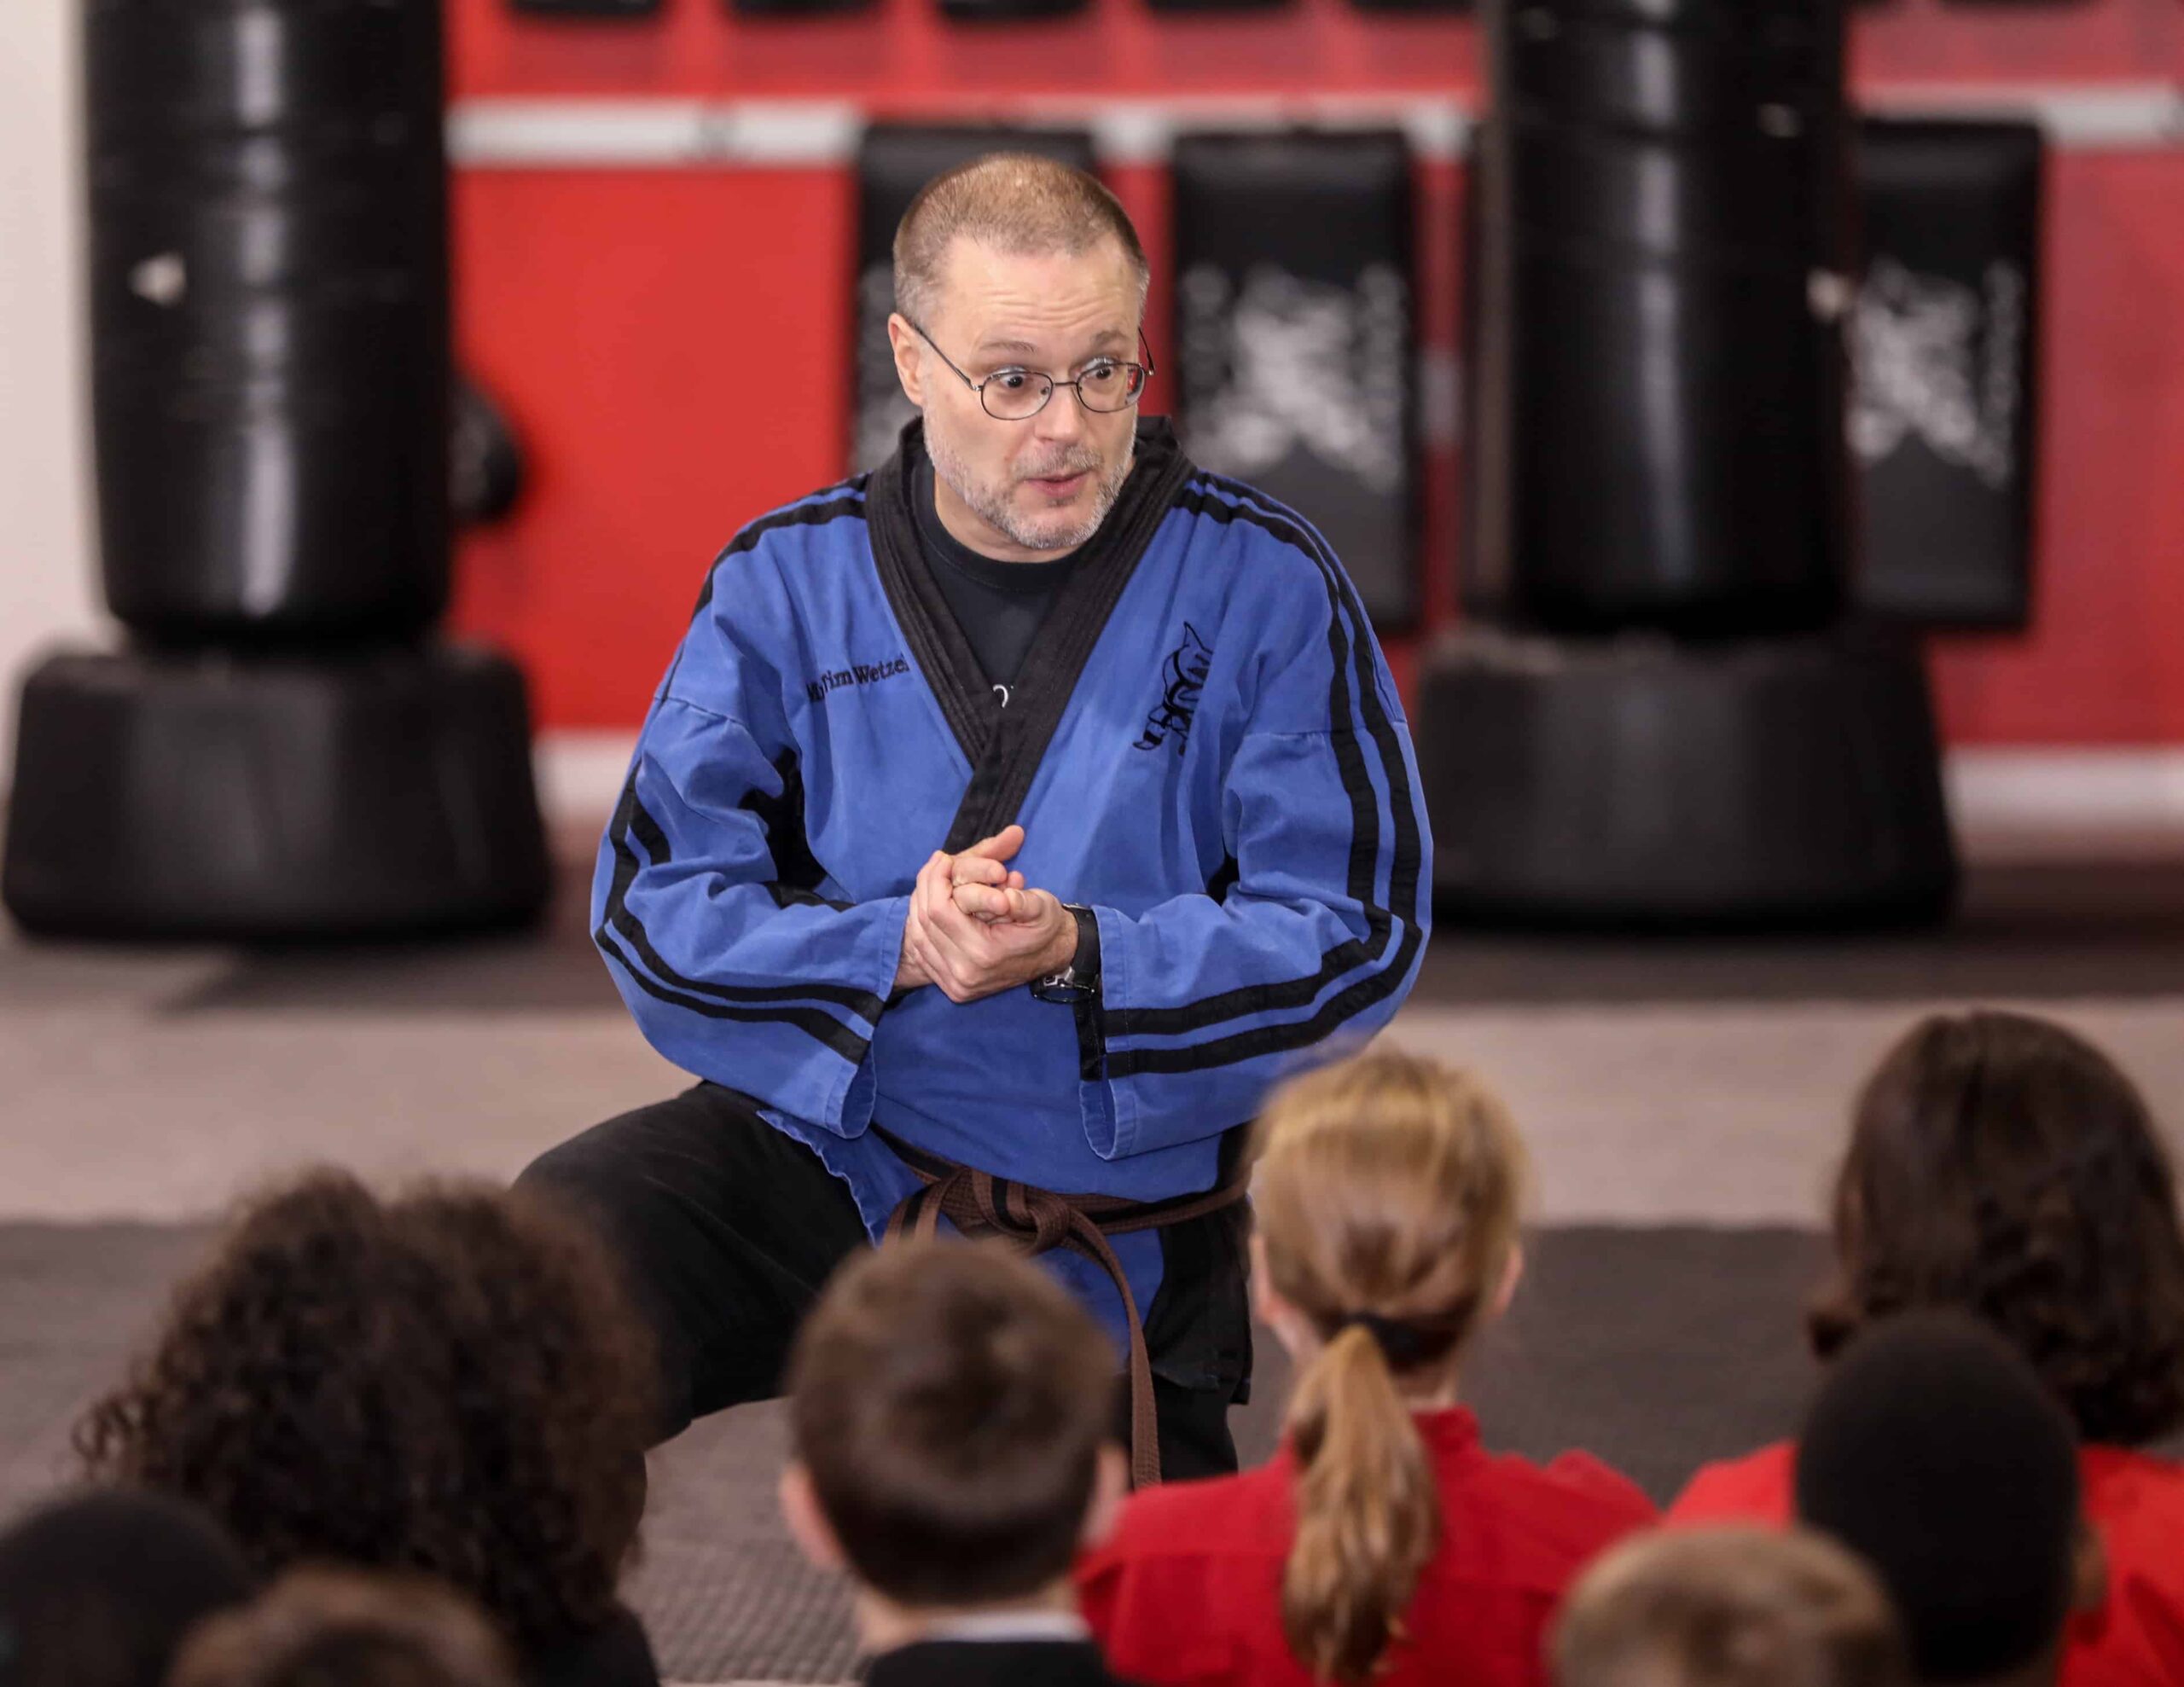 An Action Karate instructor talking to a group of students.